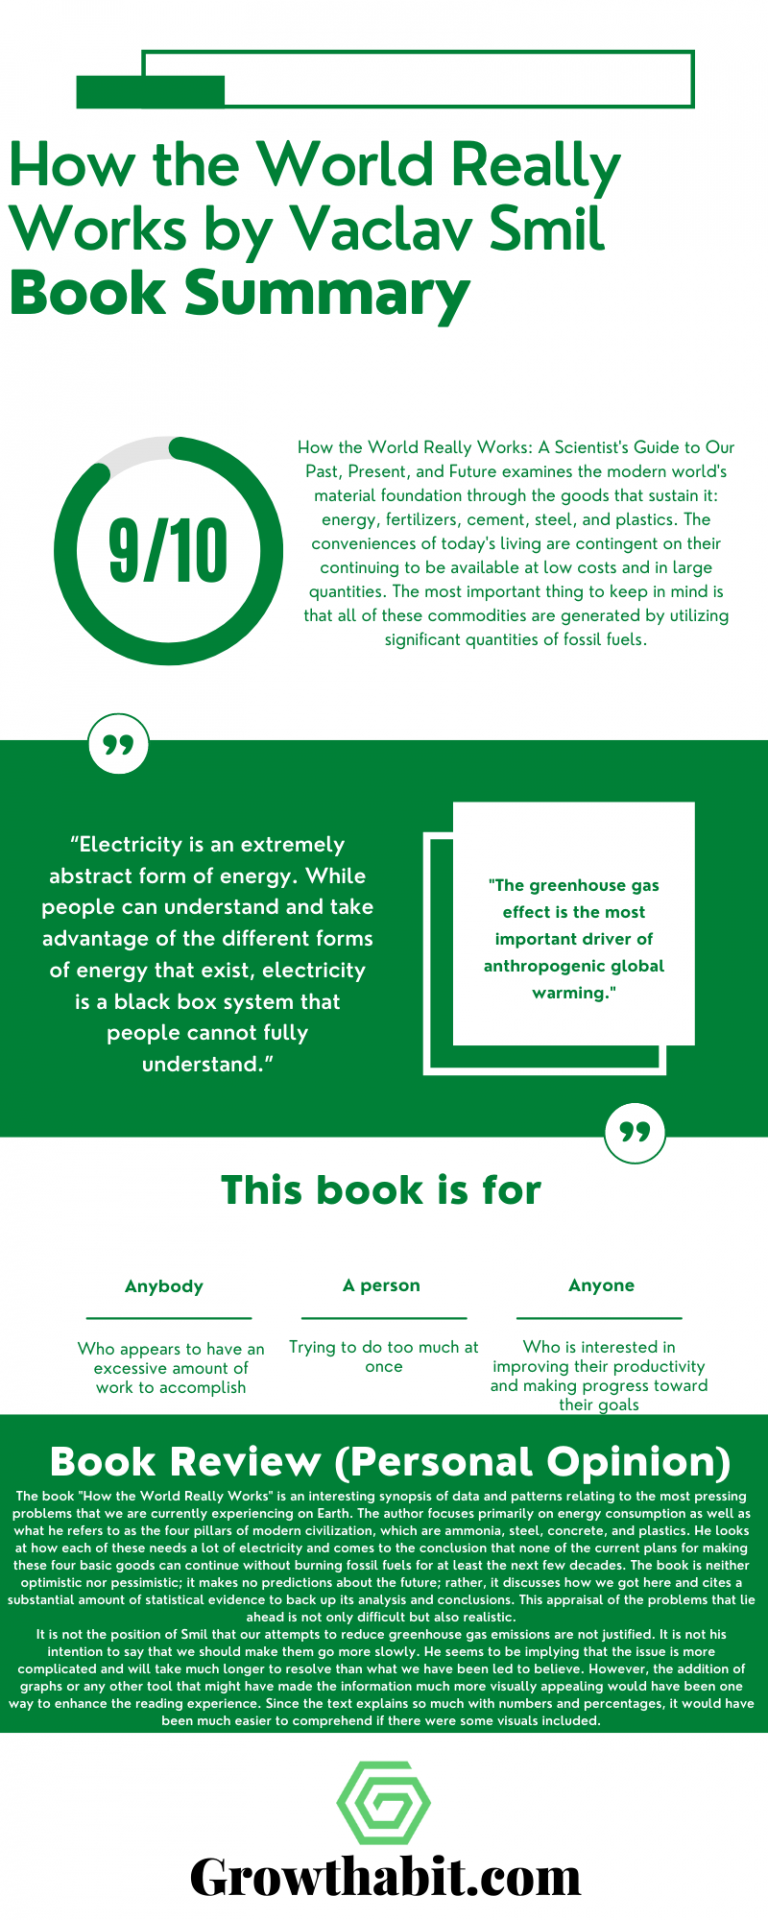 how-the-world-really-works-Book-Summary-Infographic